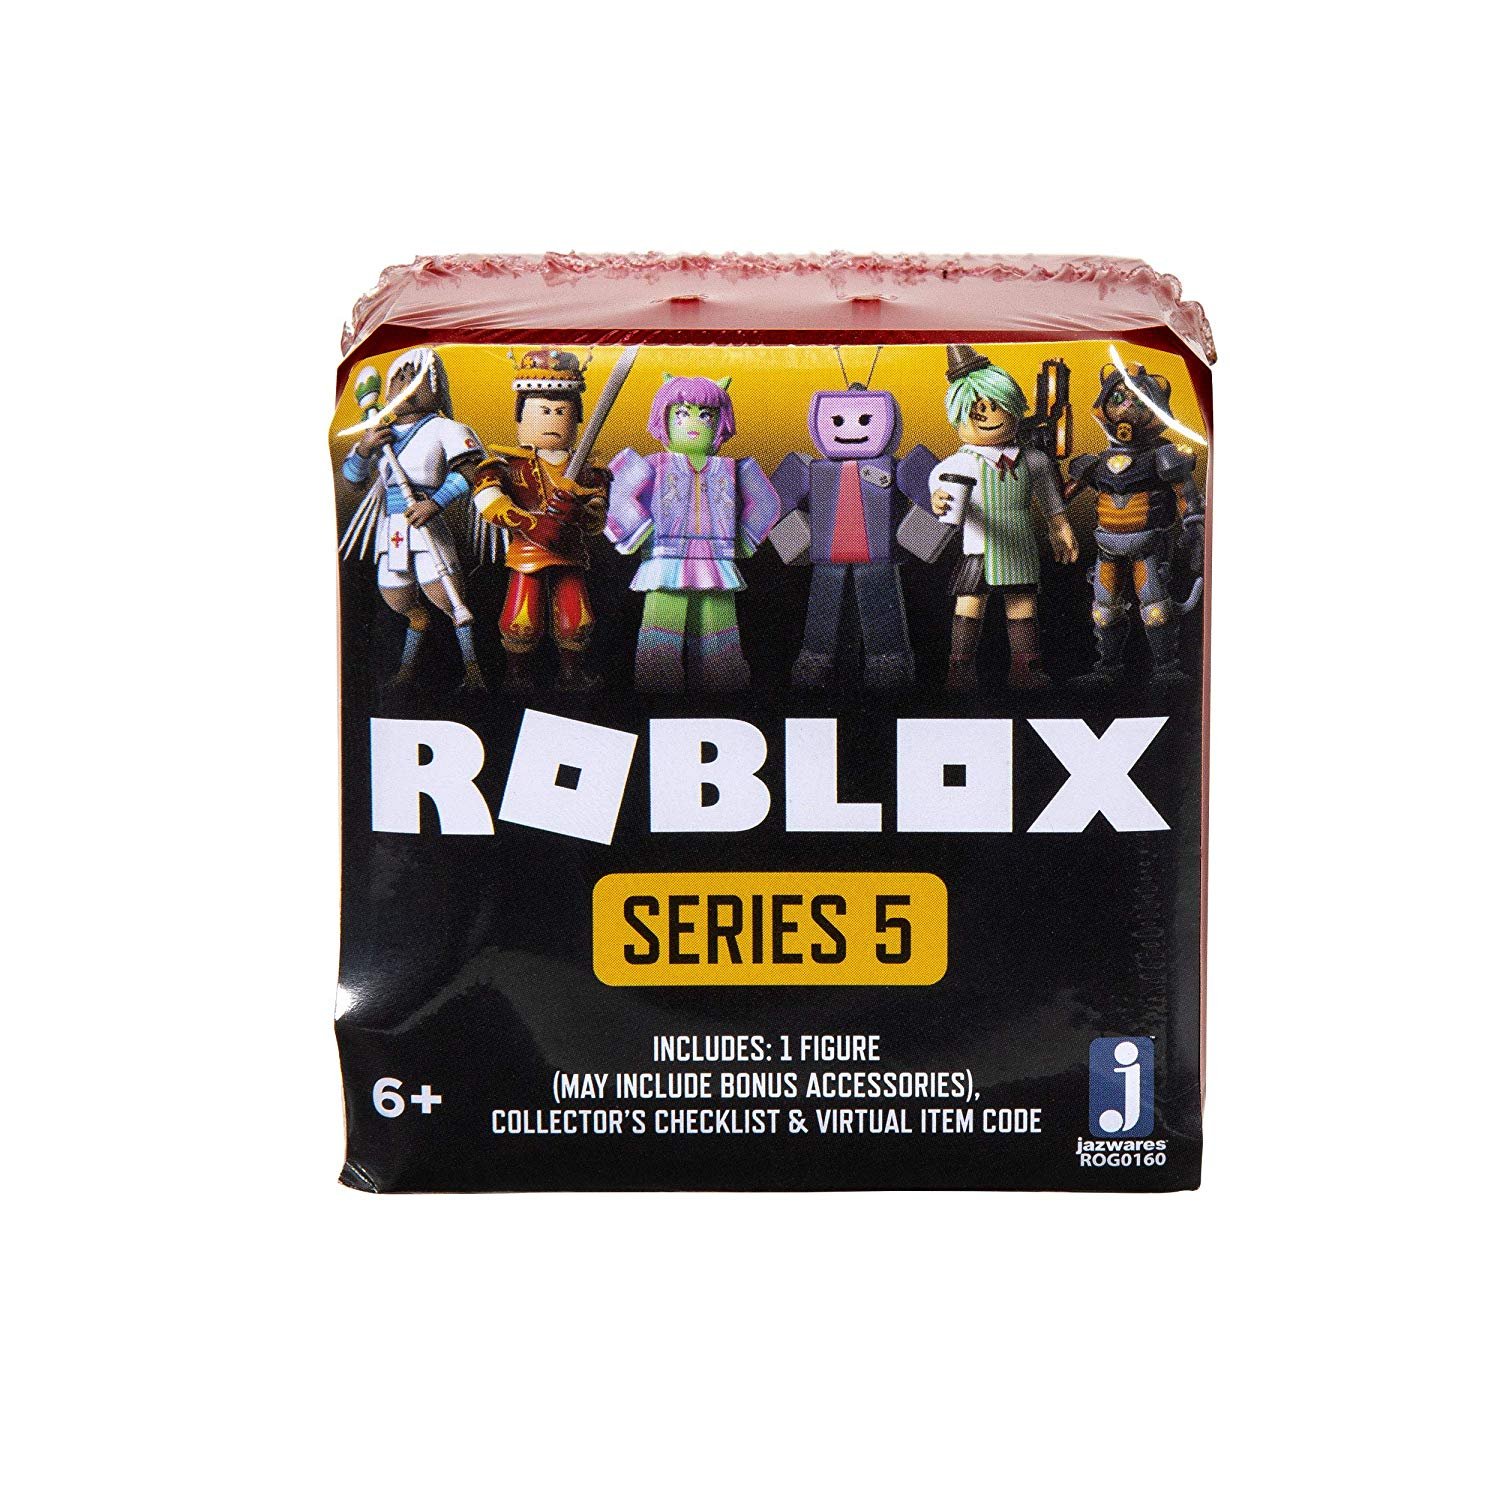 Stefan On Twitter Hey Gamers Epic News I Will Be Getting My First Toy From My First Game Work At A Coffee Shop The Work At A Coffee Shop Barista Will Be - f5 roblox